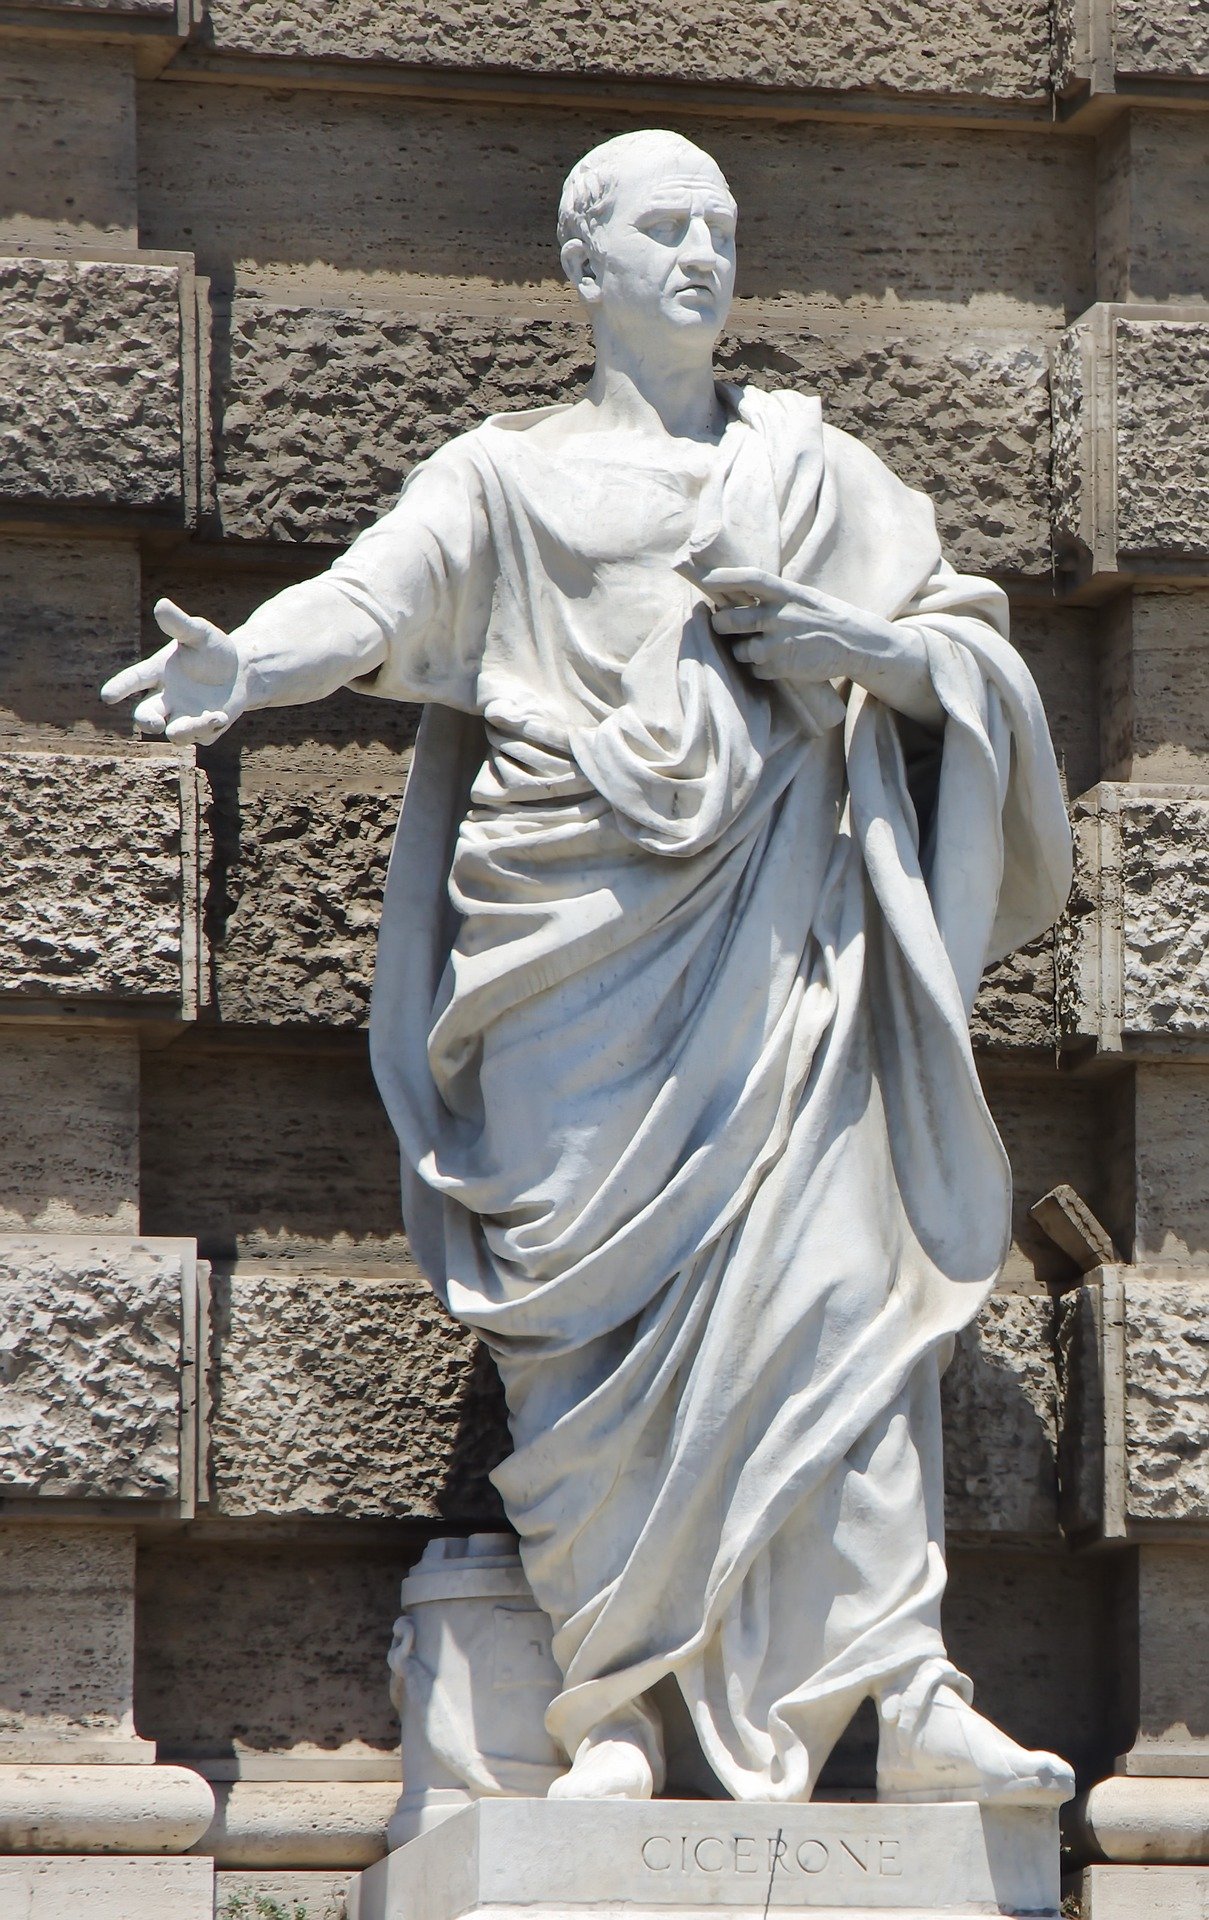 A picture of a statue of cicero